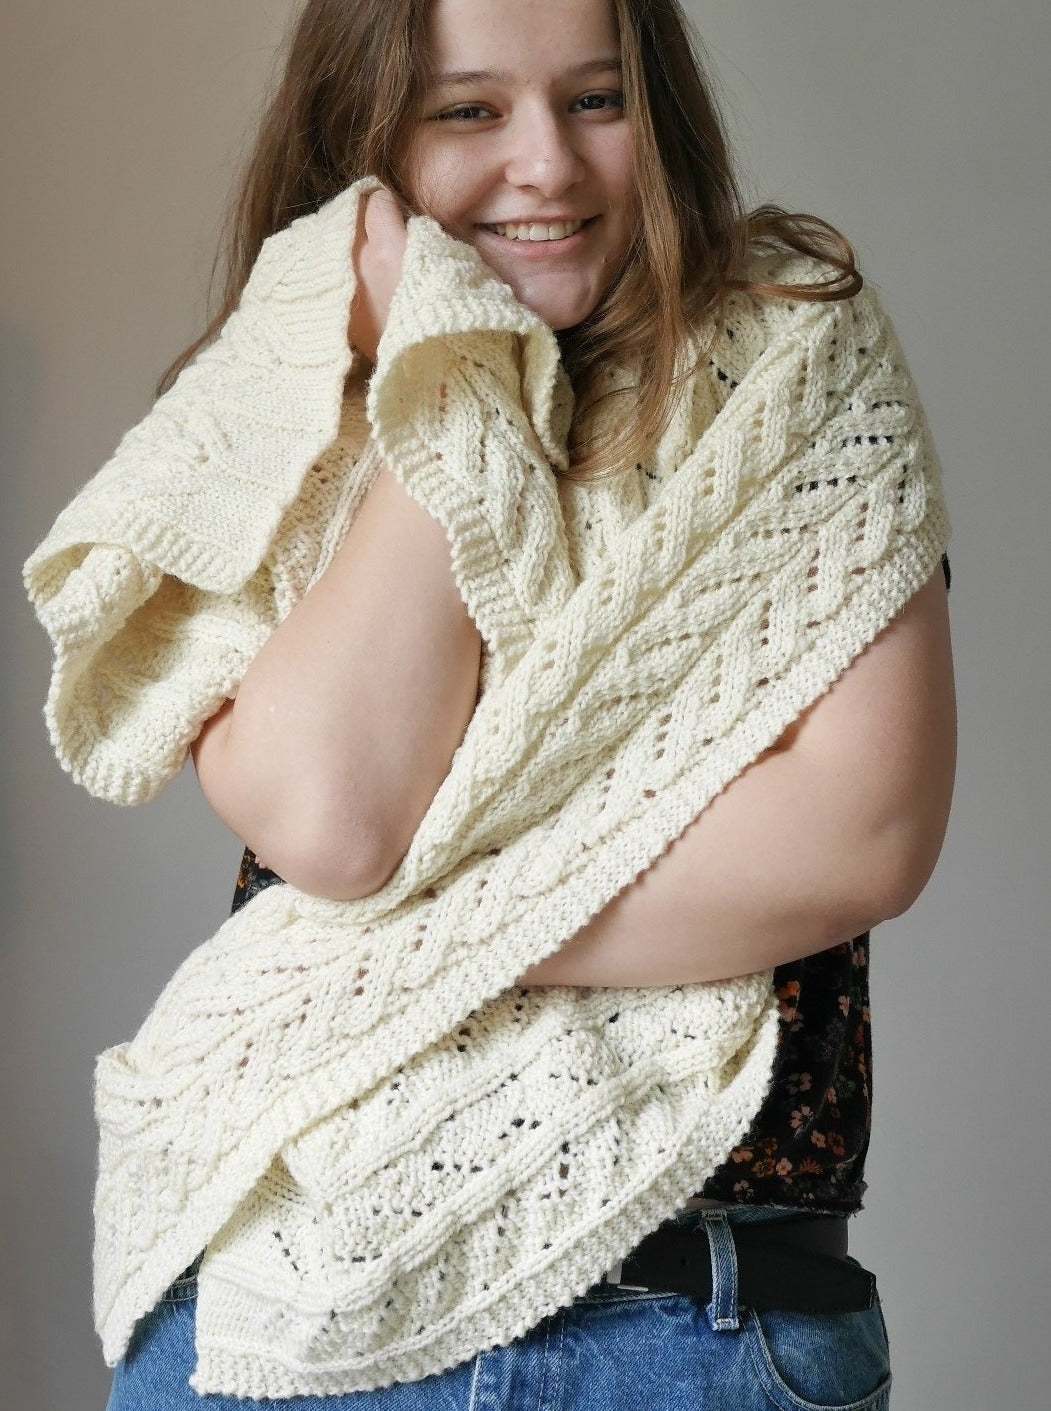 Graze Scarf and Wrap by Anne Hanson